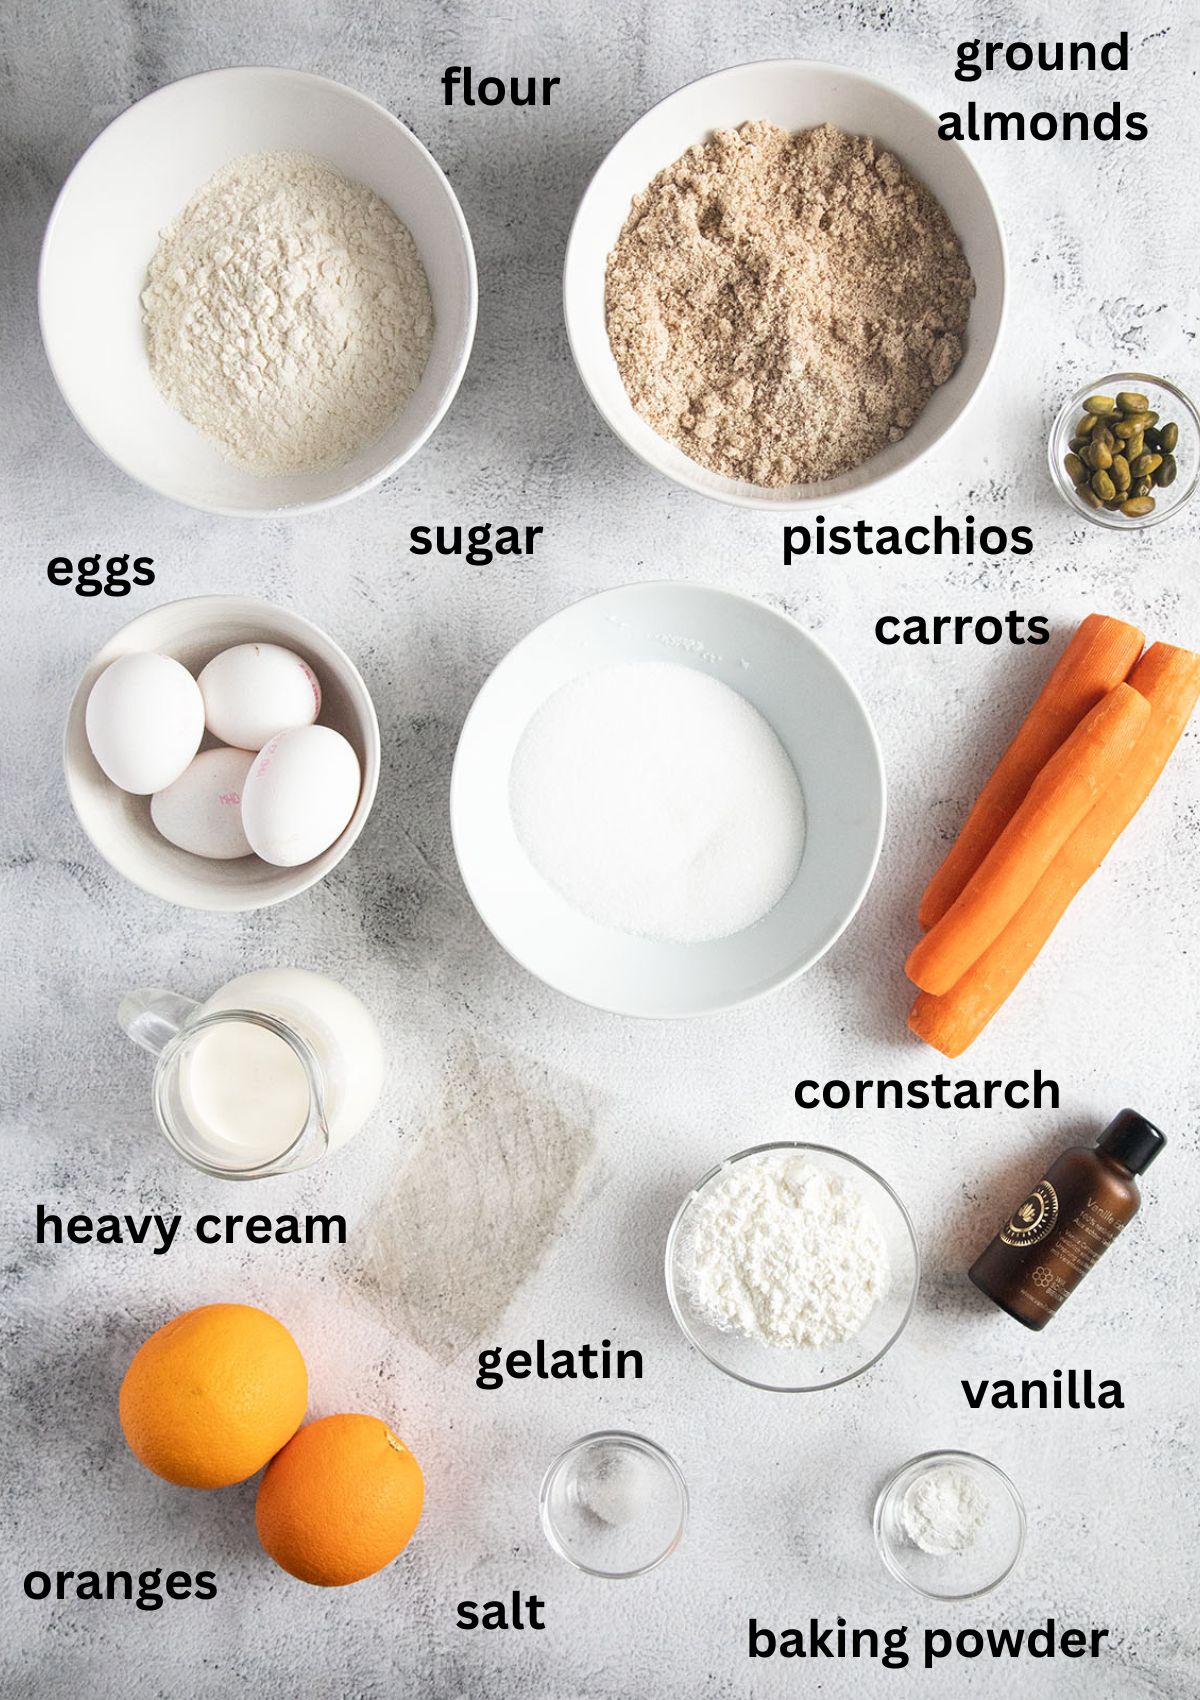 labeled ingredients for making almond carrot cake with orange and heavy cream filling.